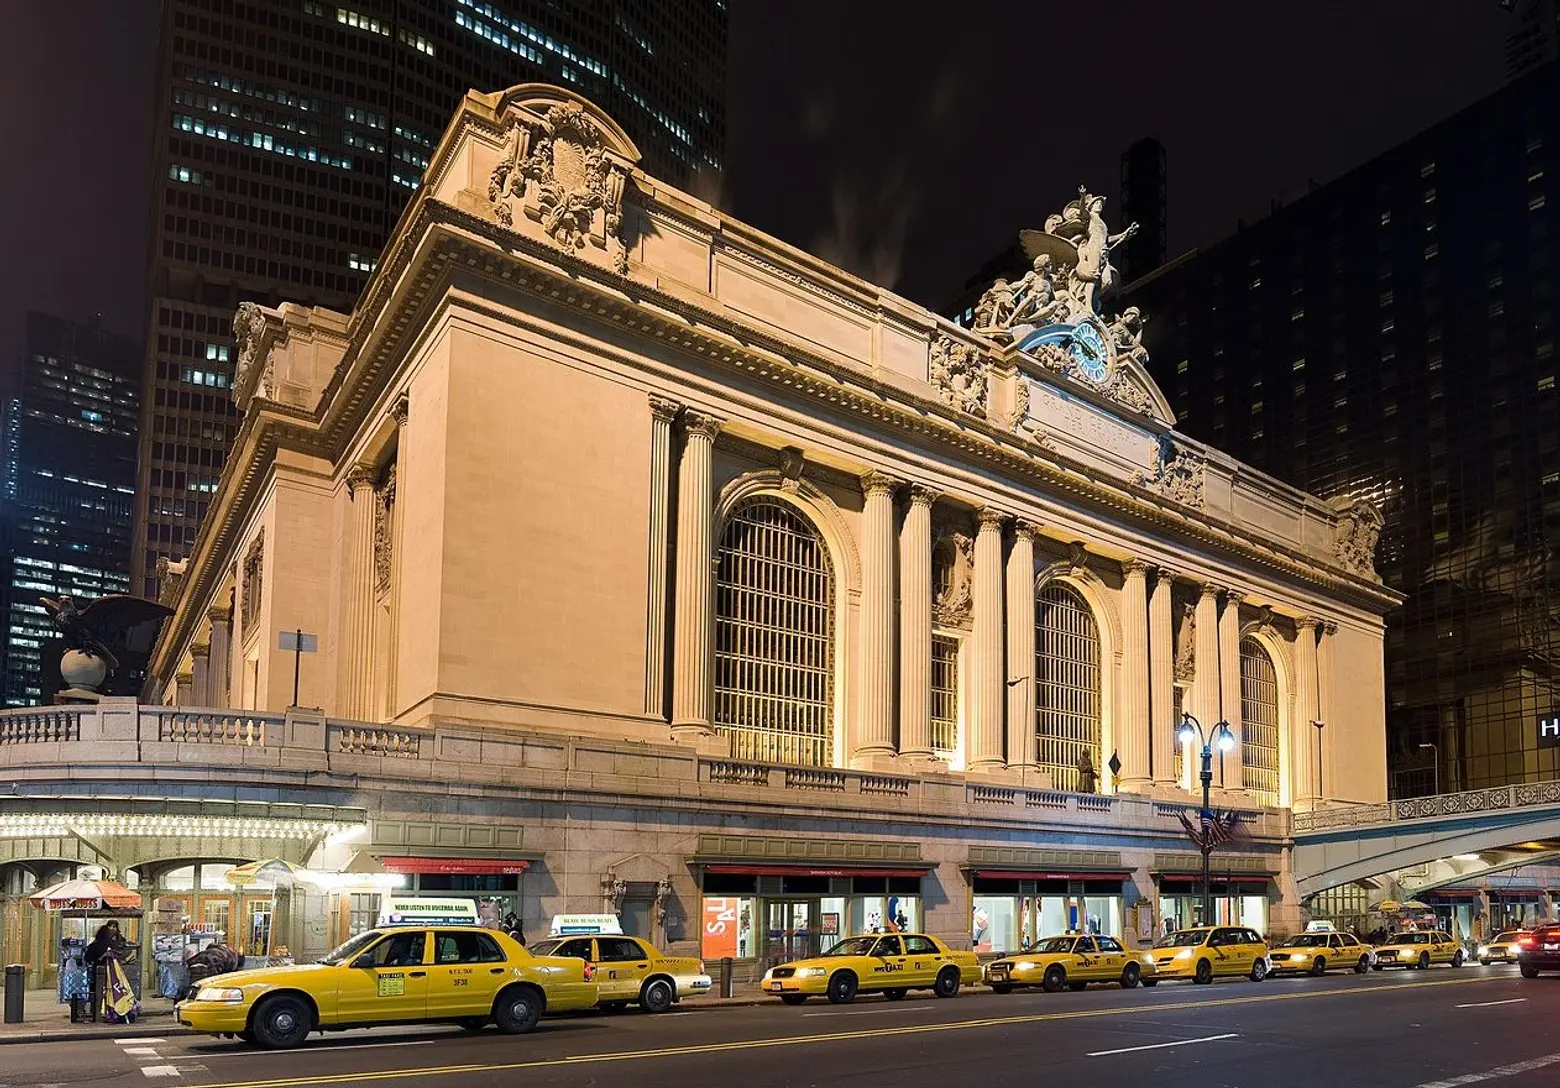 Grand Central train shed repairs could mean a mess for Midtown streets